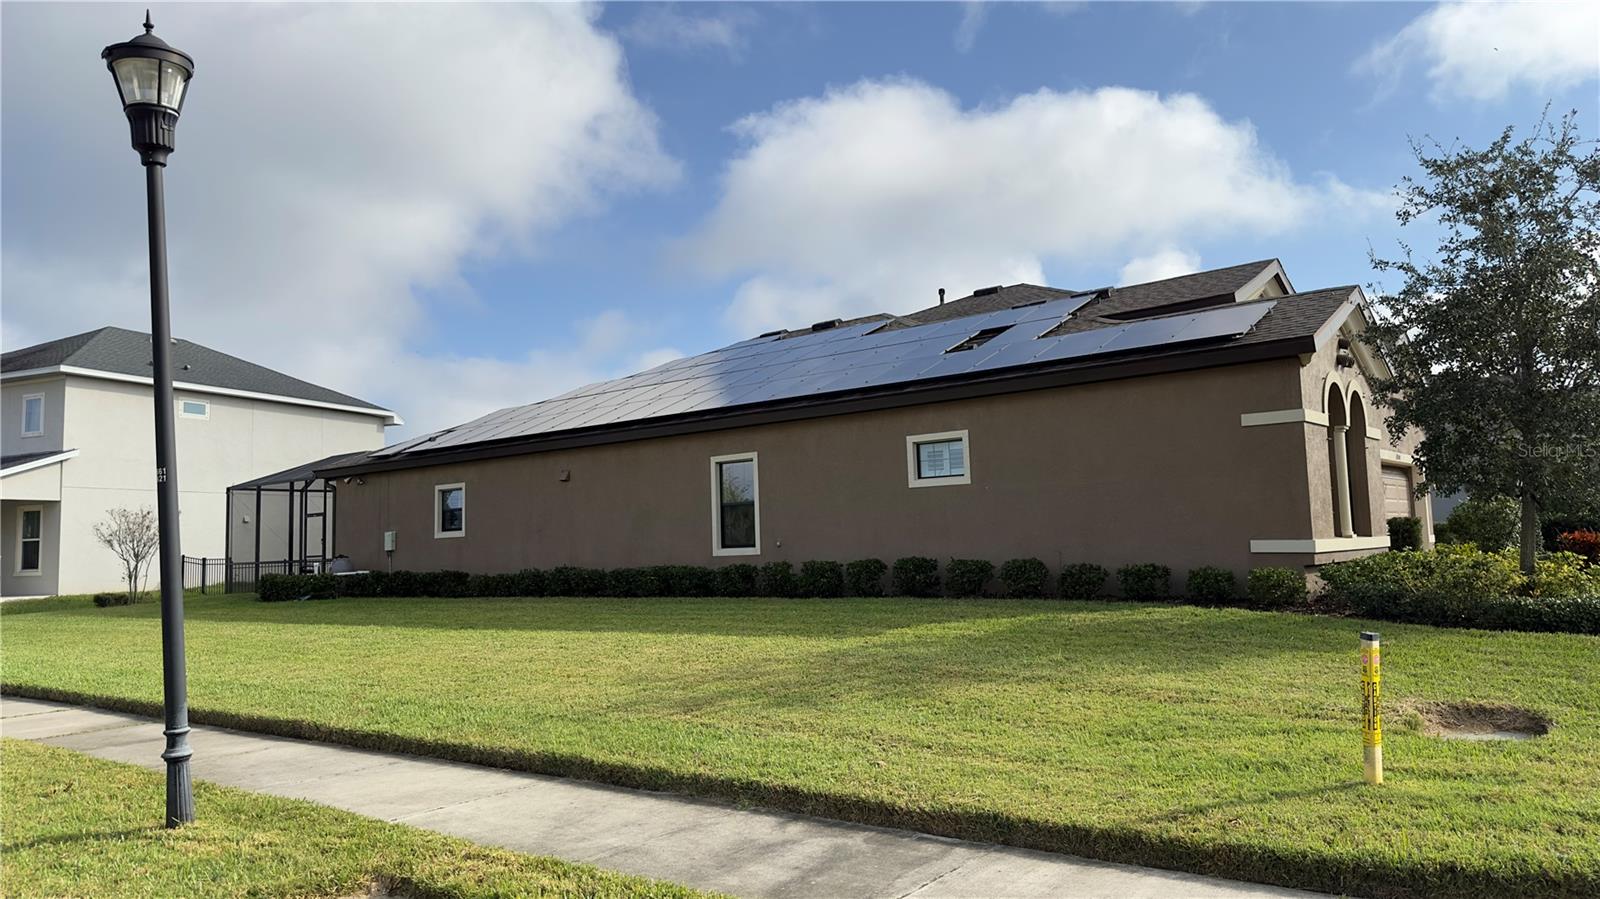 Solar panels further boost this energy efficient corner-lot home